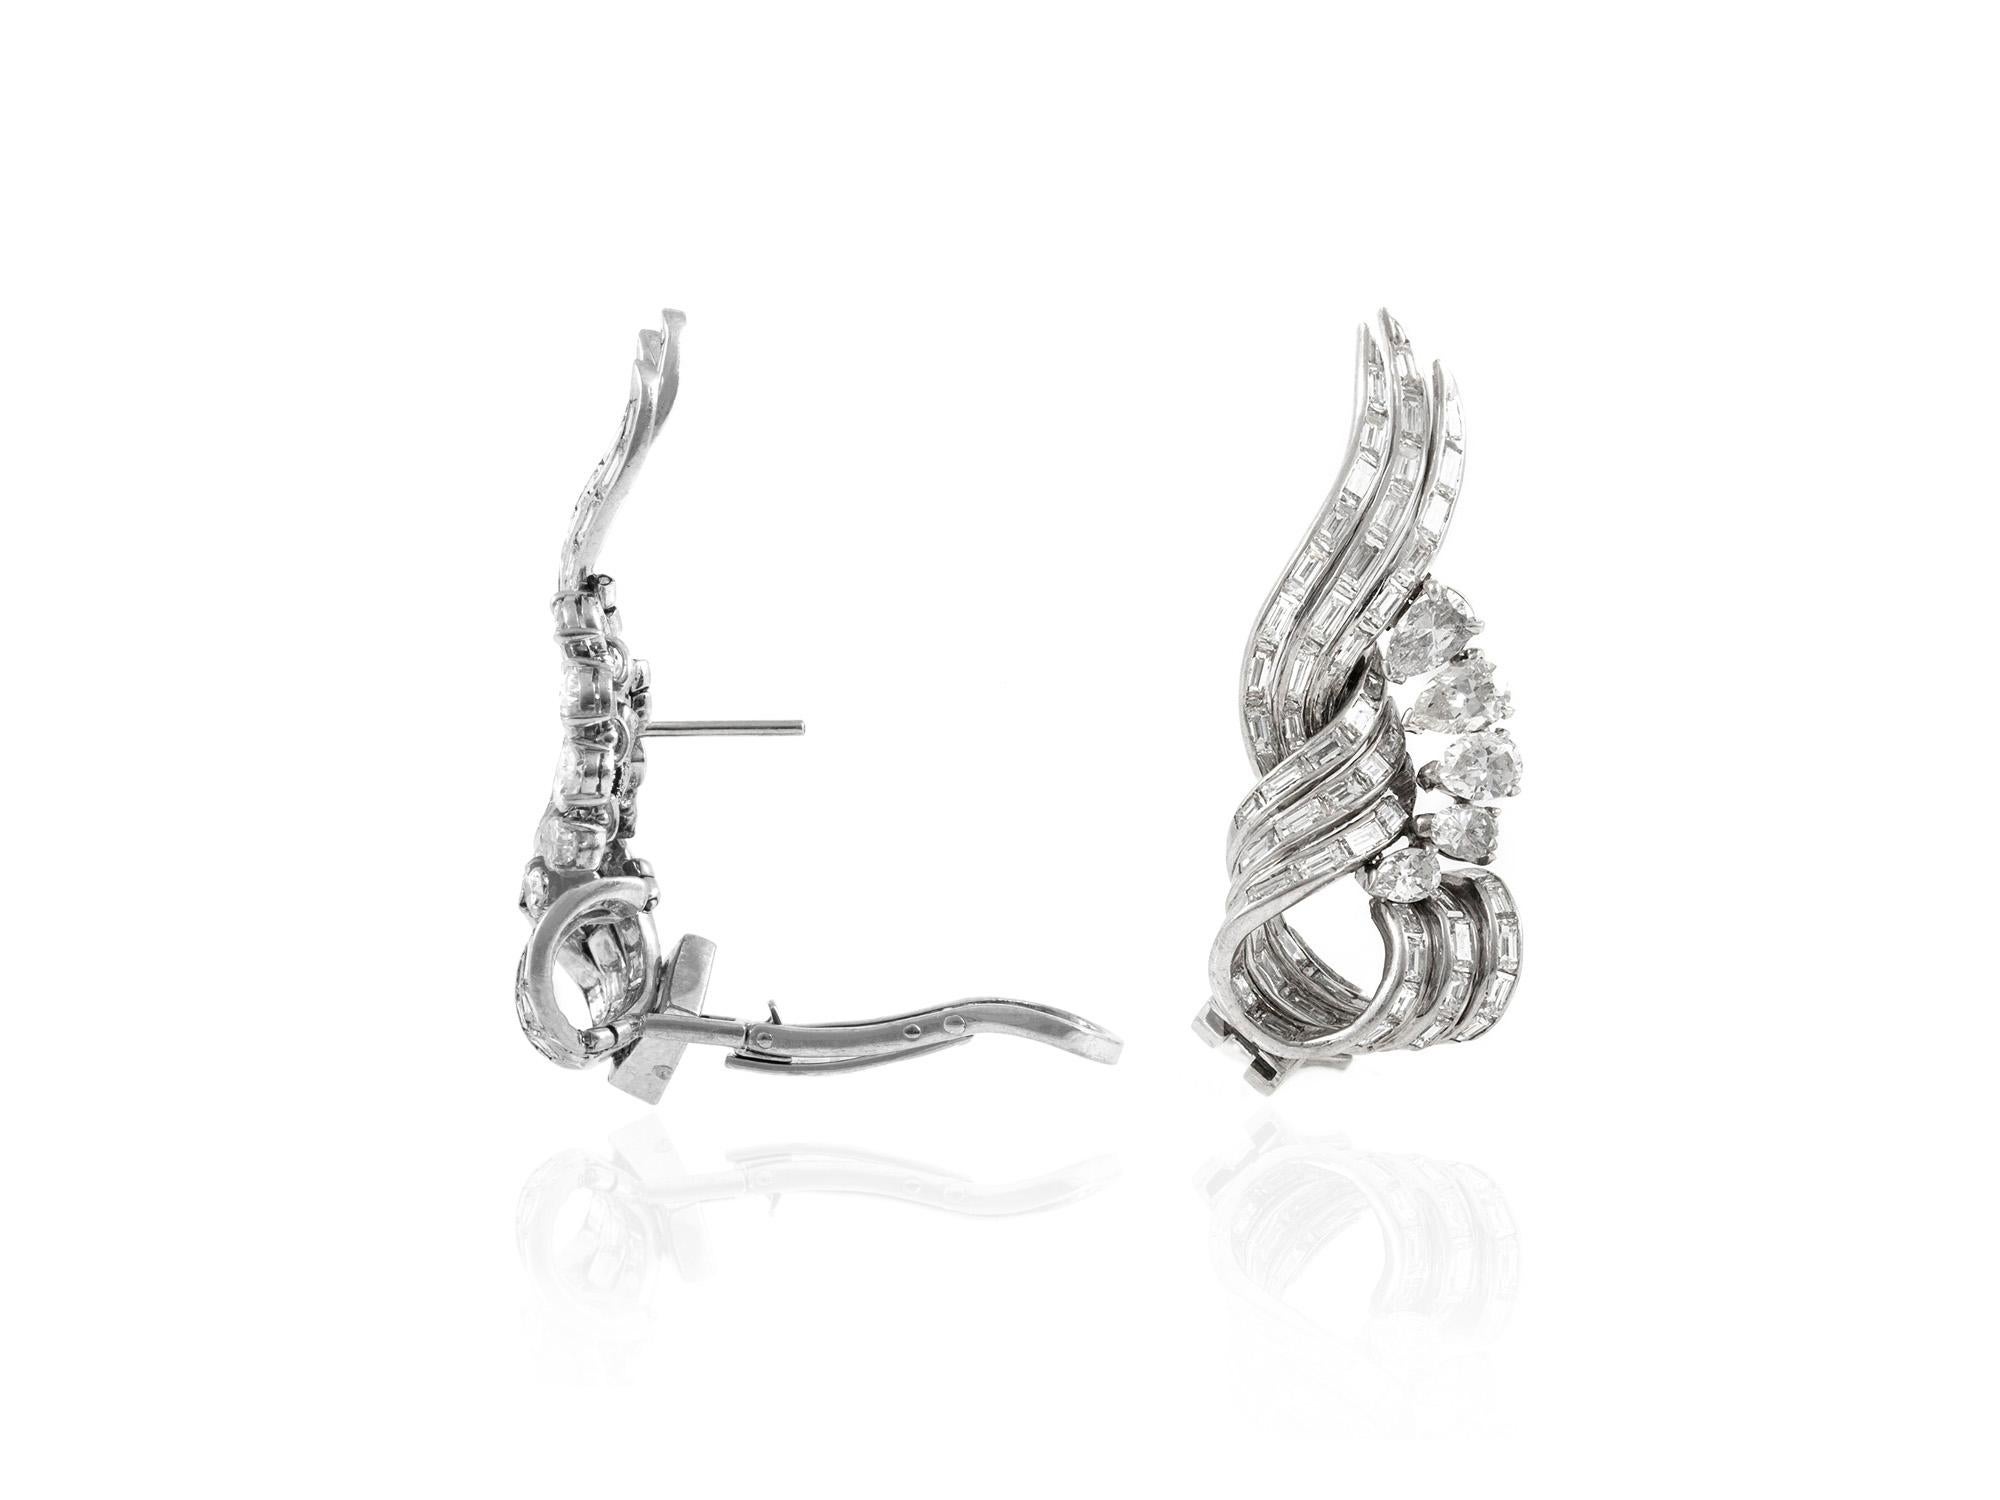 The earrings are finely crafted in platinum with diamonds in different cut weighing approximately total of 15.00 carat.
two ways to wear this earrings: possible to remove the drop part .
